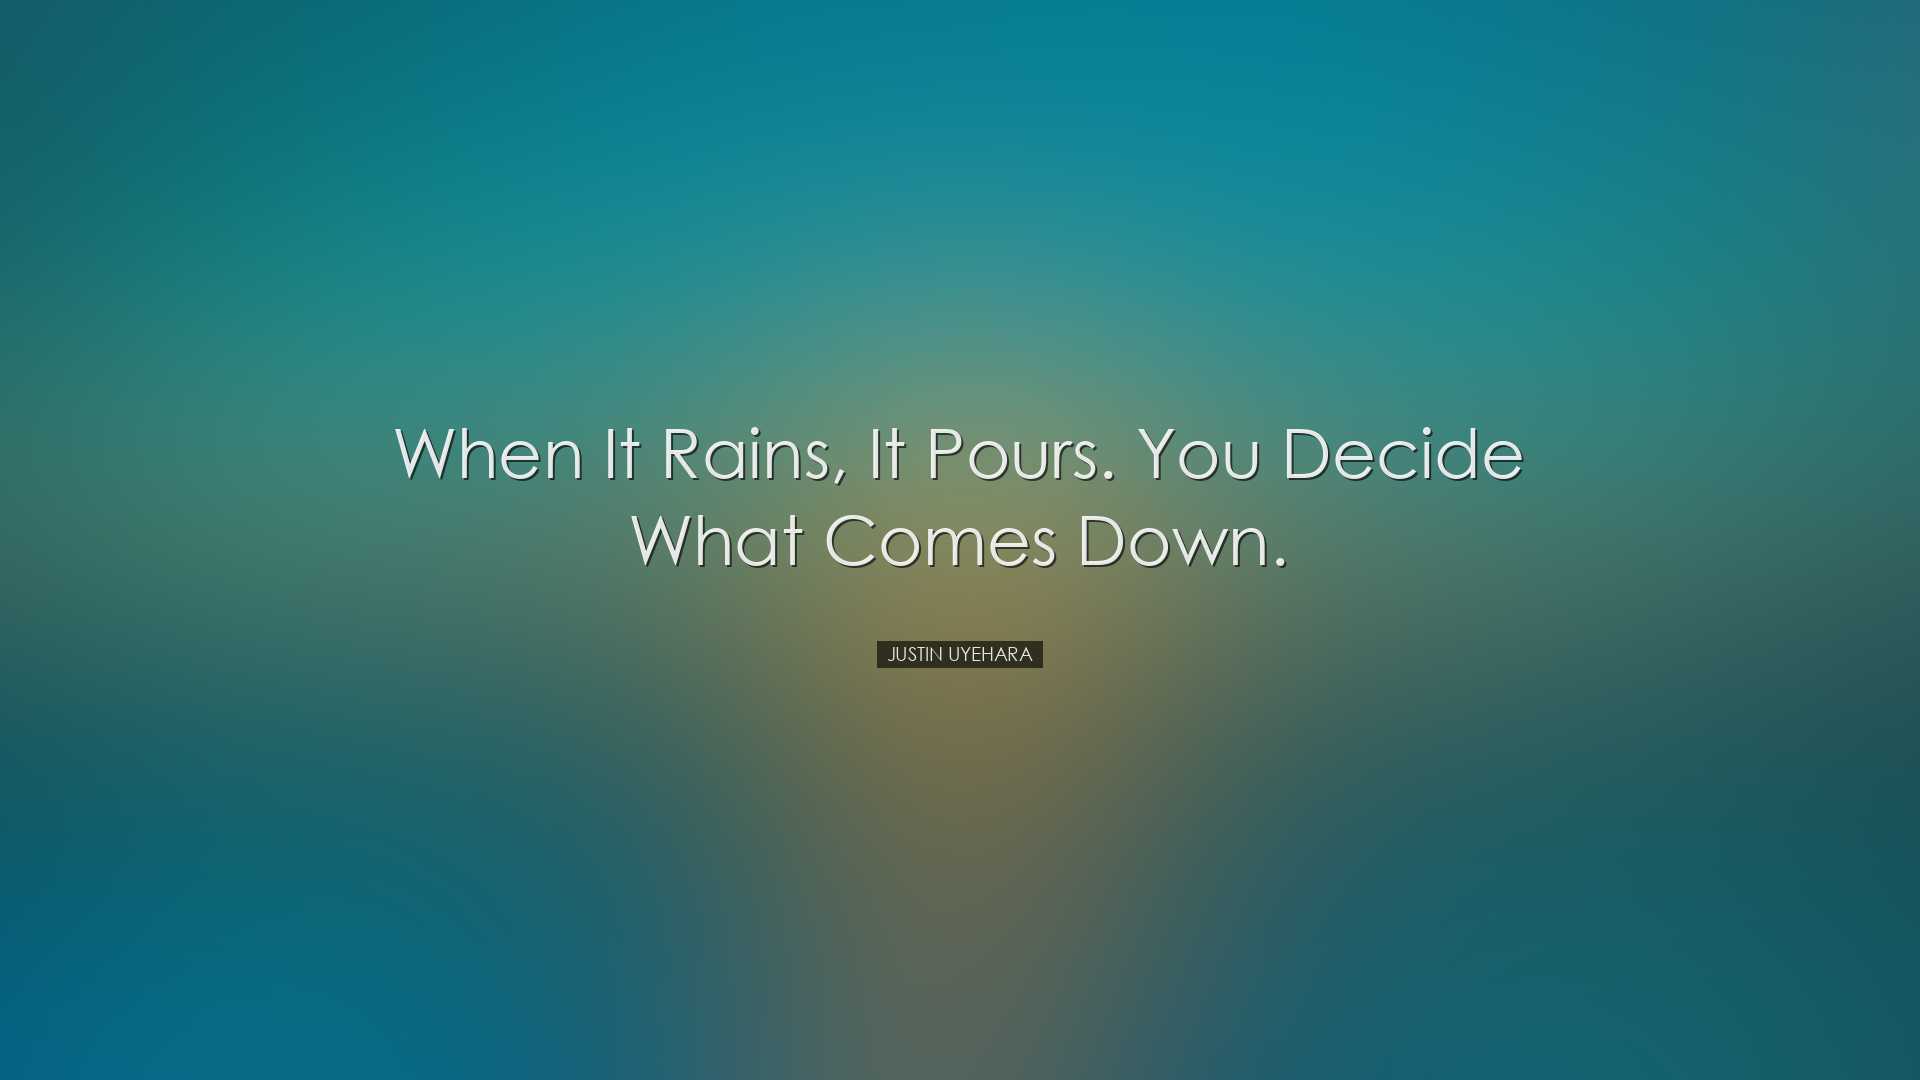 When it rains, it pours. You decide what comes down. - Justin Uyeh